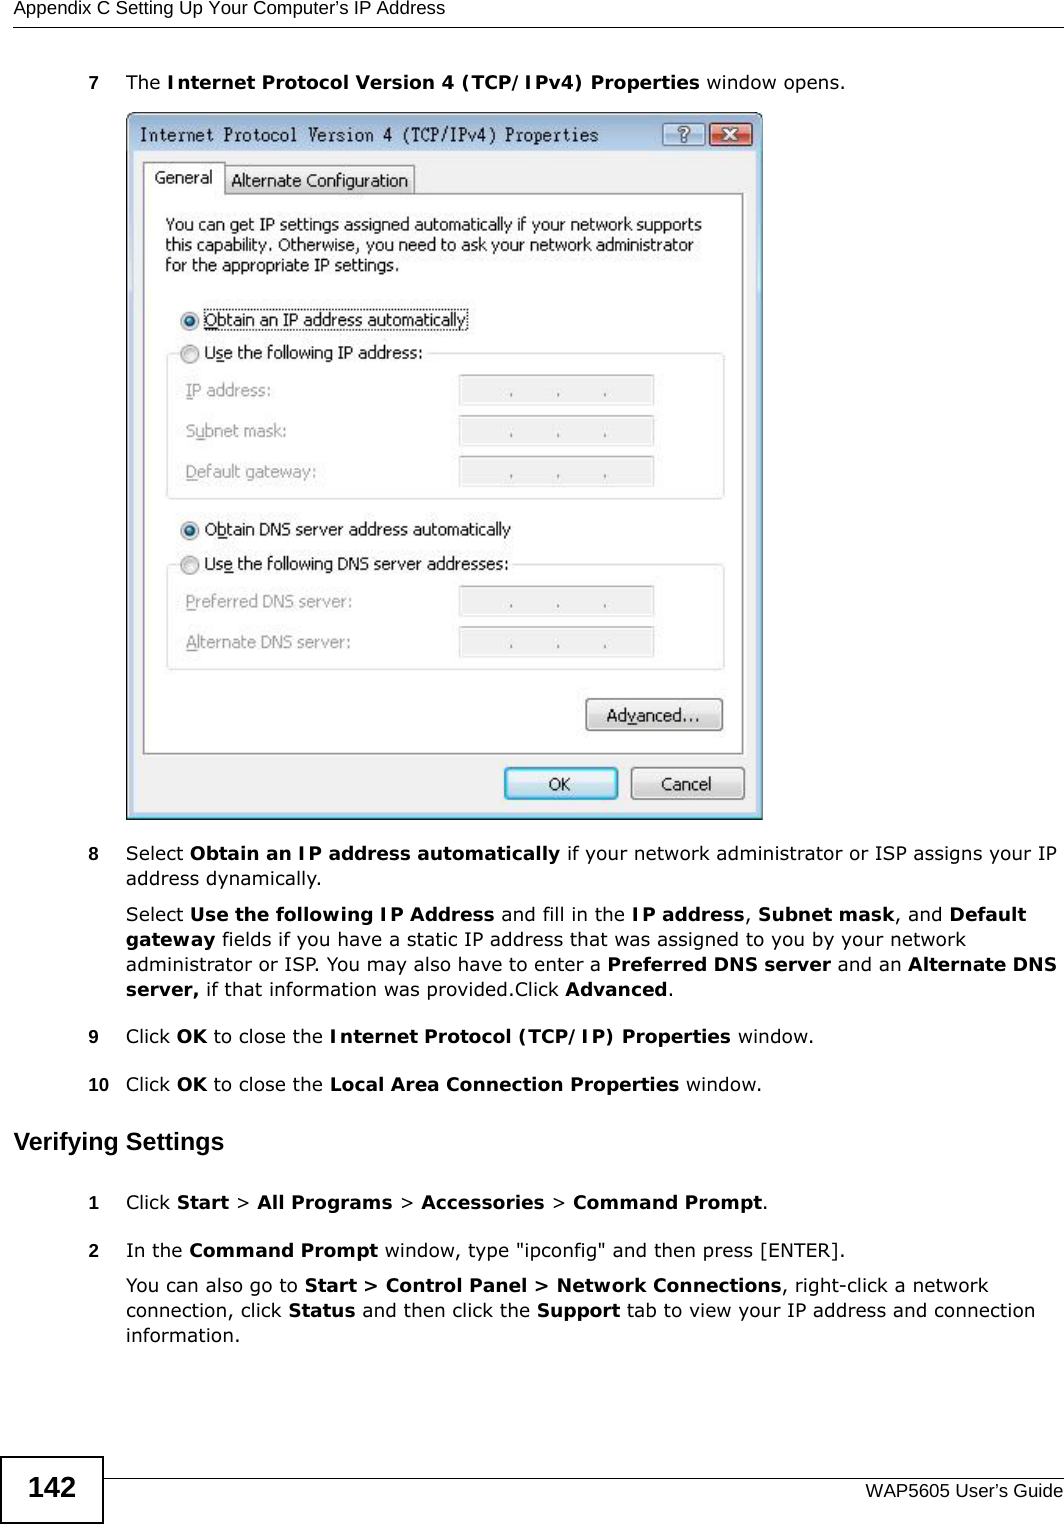 Appendix C Setting Up Your Computer’s IP AddressWAP5605 User’s Guide1427The Internet Protocol Version 4 (TCP/IPv4) Properties window opens.8Select Obtain an IP address automatically if your network administrator or ISP assigns your IP address dynamically.Select Use the following IP Address and fill in the IP address, Subnet mask, and Default gateway fields if you have a static IP address that was assigned to you by your network administrator or ISP. You may also have to enter a Preferred DNS server and an Alternate DNS server, if that information was provided.Click Advanced.9Click OK to close the Internet Protocol (TCP/IP) Properties window.10 Click OK to close the Local Area Connection Properties window.Verifying Settings1Click Start &gt; All Programs &gt; Accessories &gt; Command Prompt.2In the Command Prompt window, type &quot;ipconfig&quot; and then press [ENTER]. You can also go to Start &gt; Control Panel &gt; Network Connections, right-click a network connection, click Status and then click the Support tab to view your IP address and connection information.